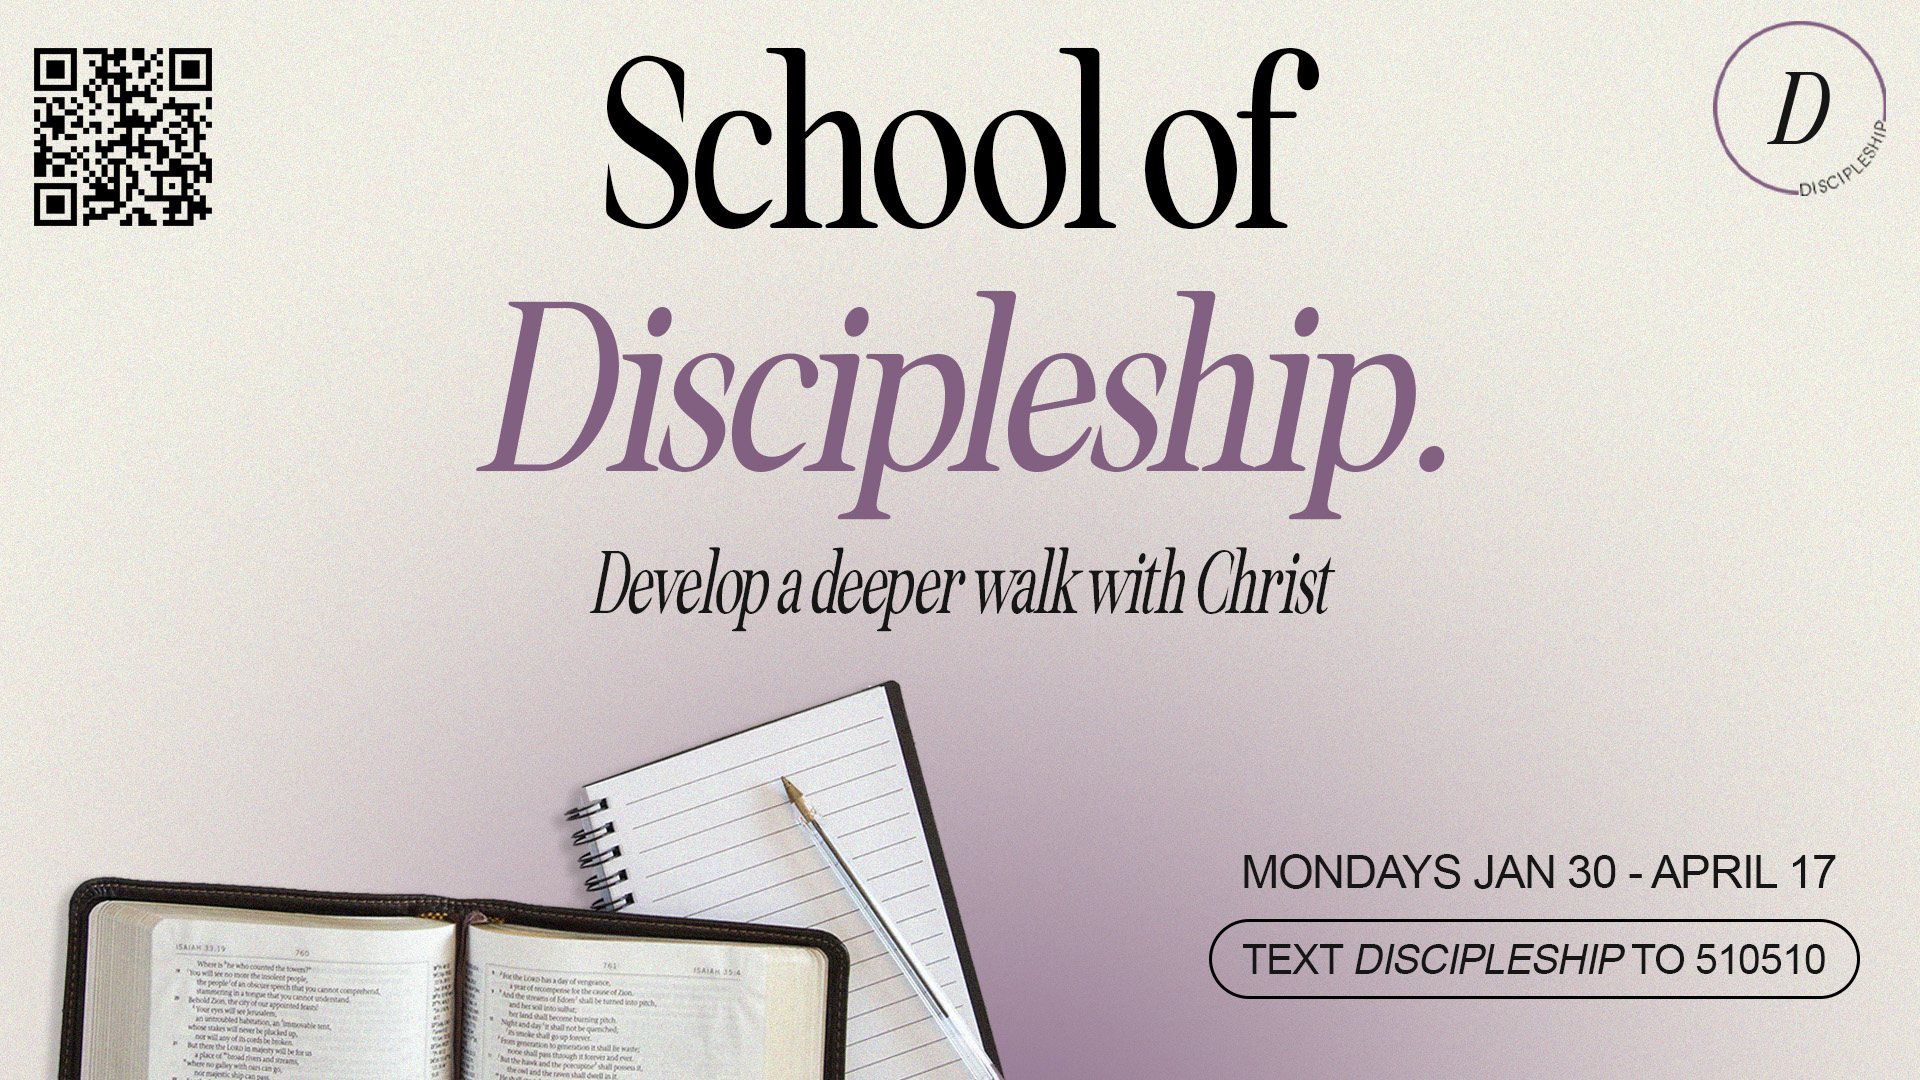 School of Discipleship - Spring Session at the Cumming campus